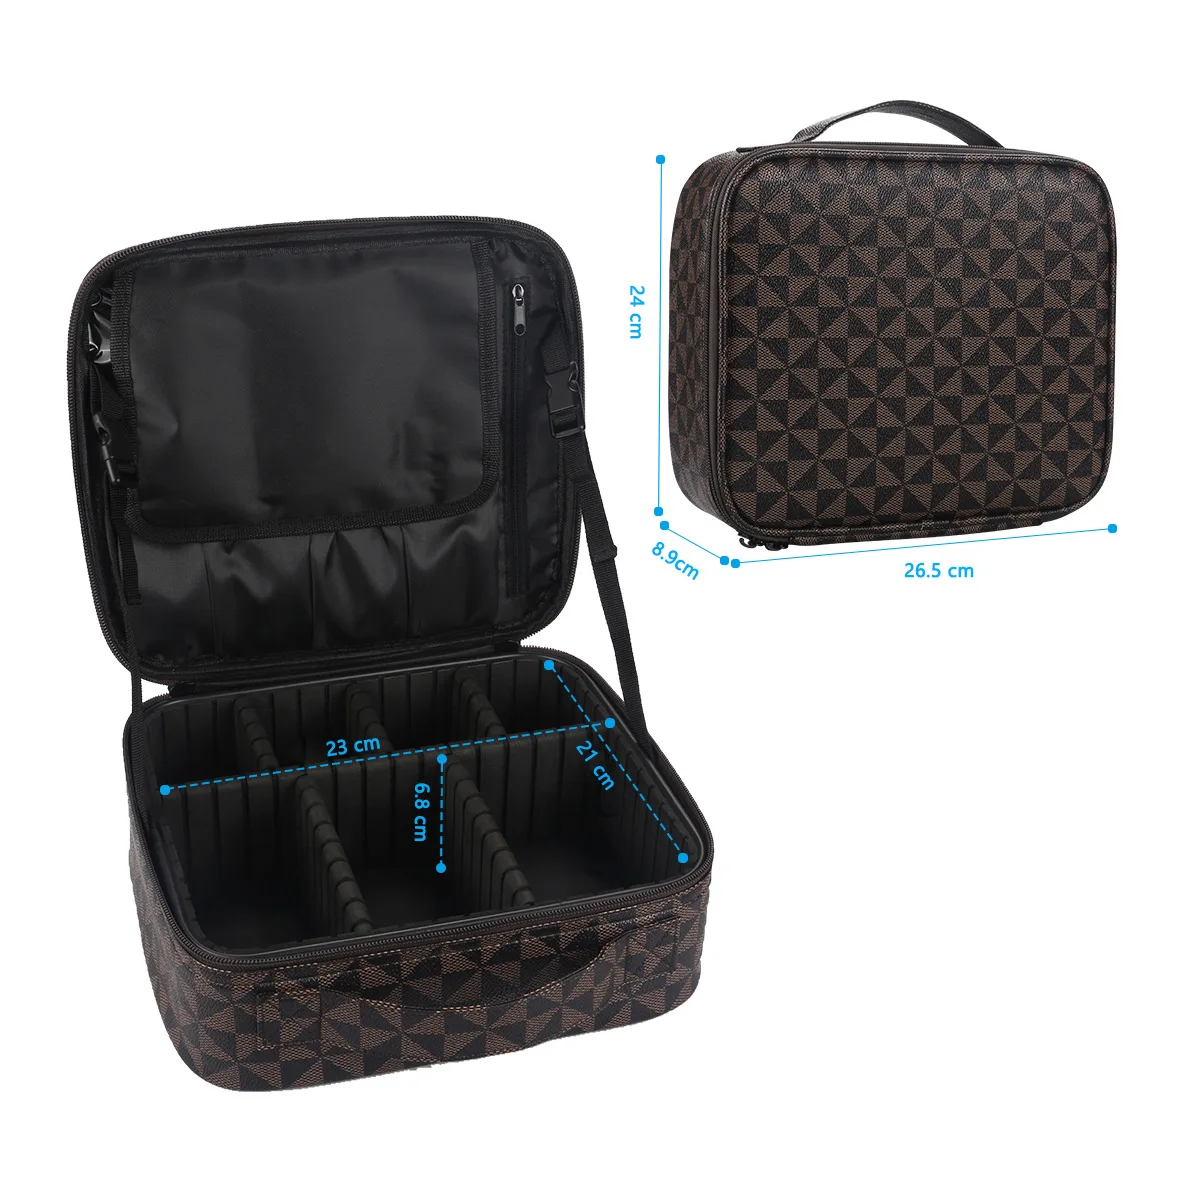 

New Arrival Portable Makeup Train Case with Adjustable Dividers Organizer Travel Kit Artist Cosmetic Bag